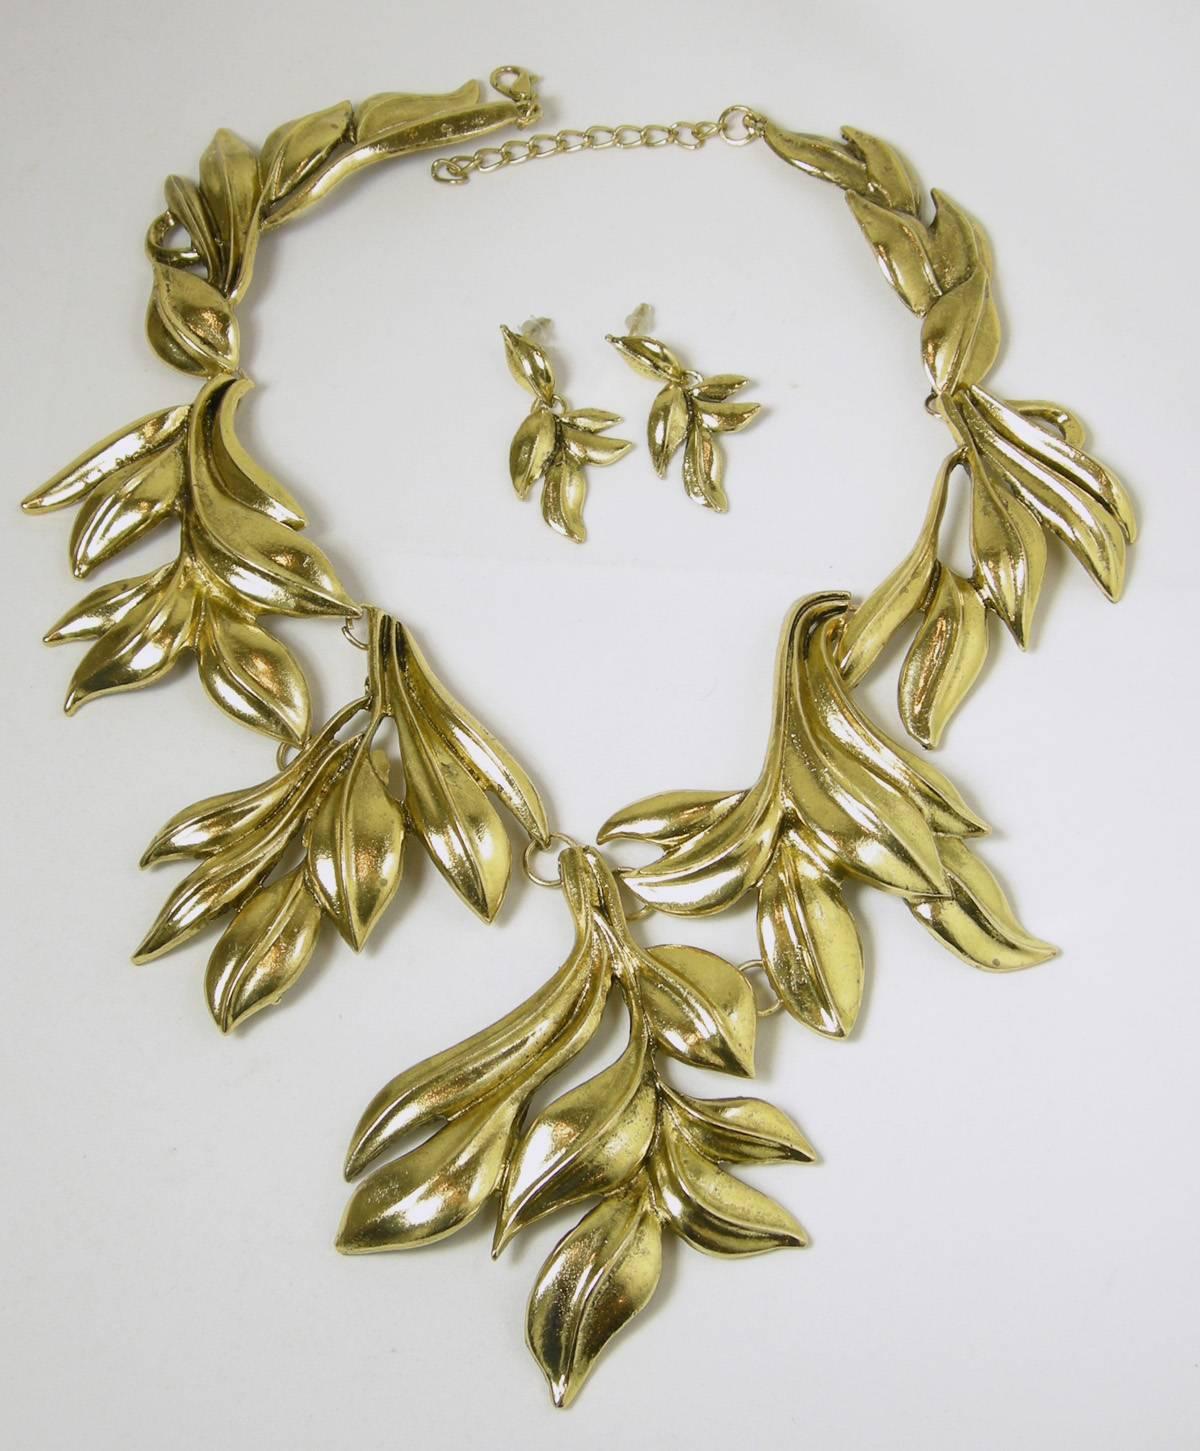 You will have fun wearing this unsigned Oscar De La Renta leaf motif necklace. It is bold and makes a statement. In a gold setting with a lobster clasp, this necklace measures 19” x 4”. The earrings measure 2” x 1/4